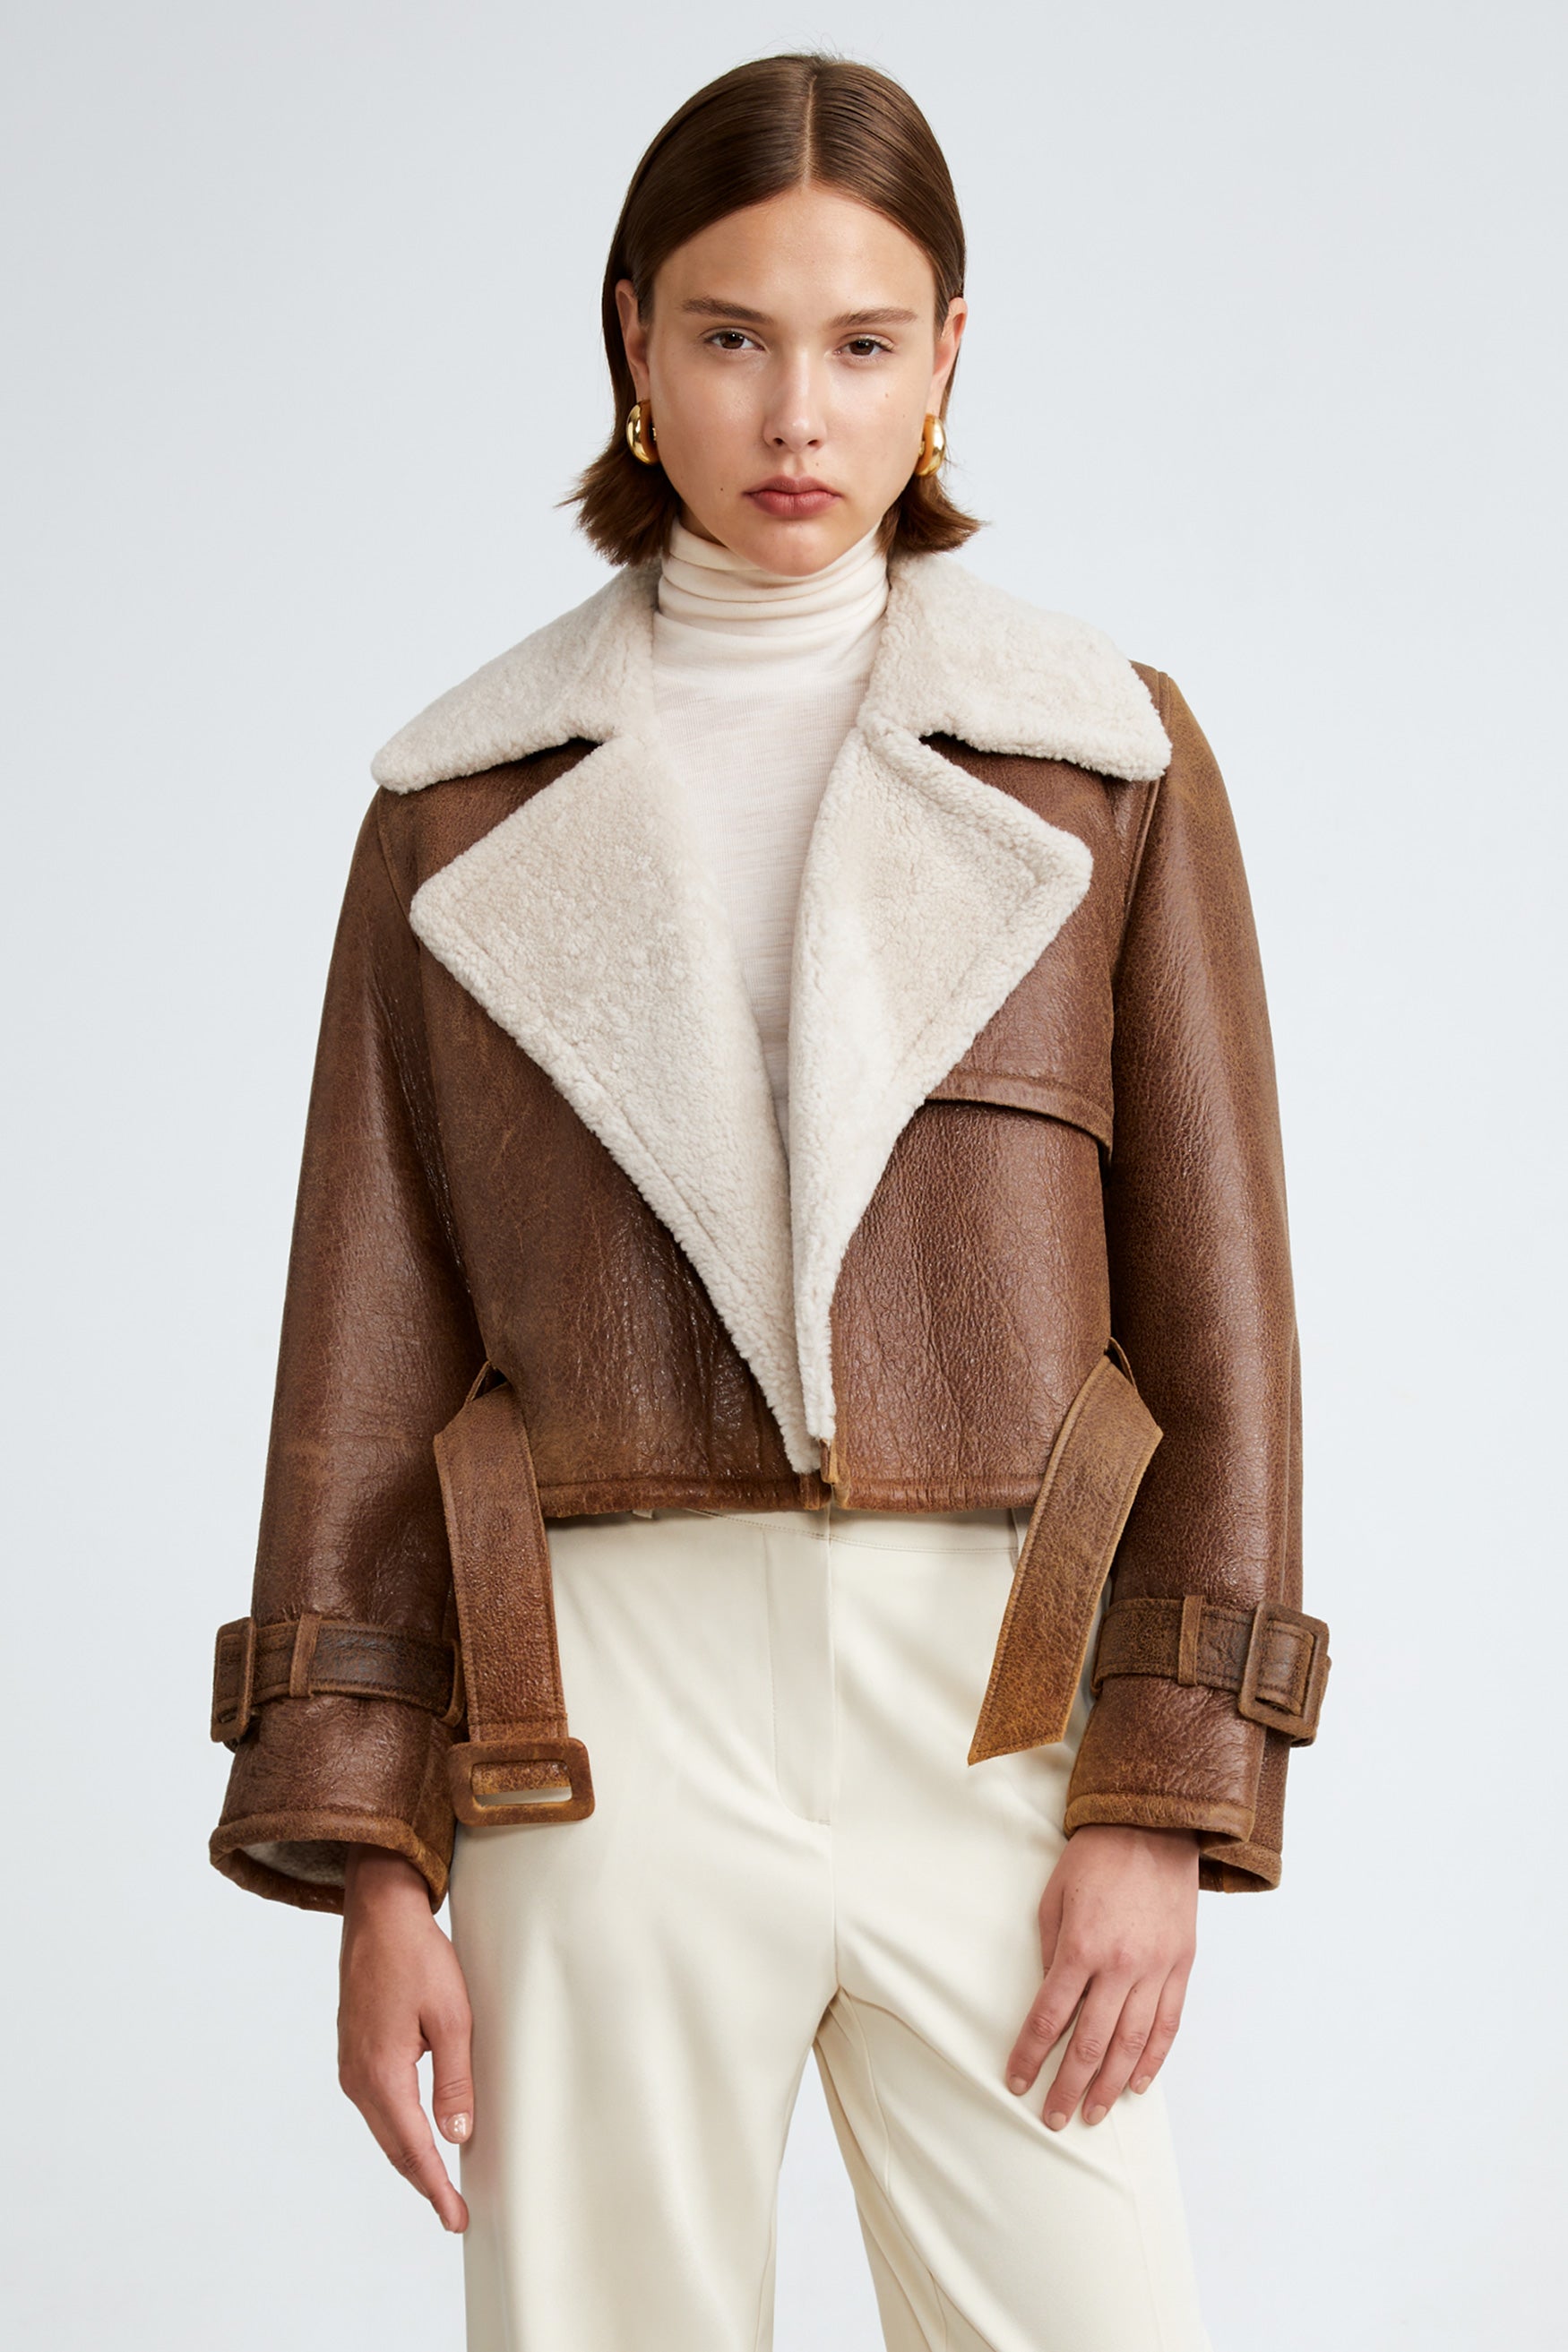 Model is wearing the Hatti Shearling Camel Ivory Cropped Shearling Jacket Close Up